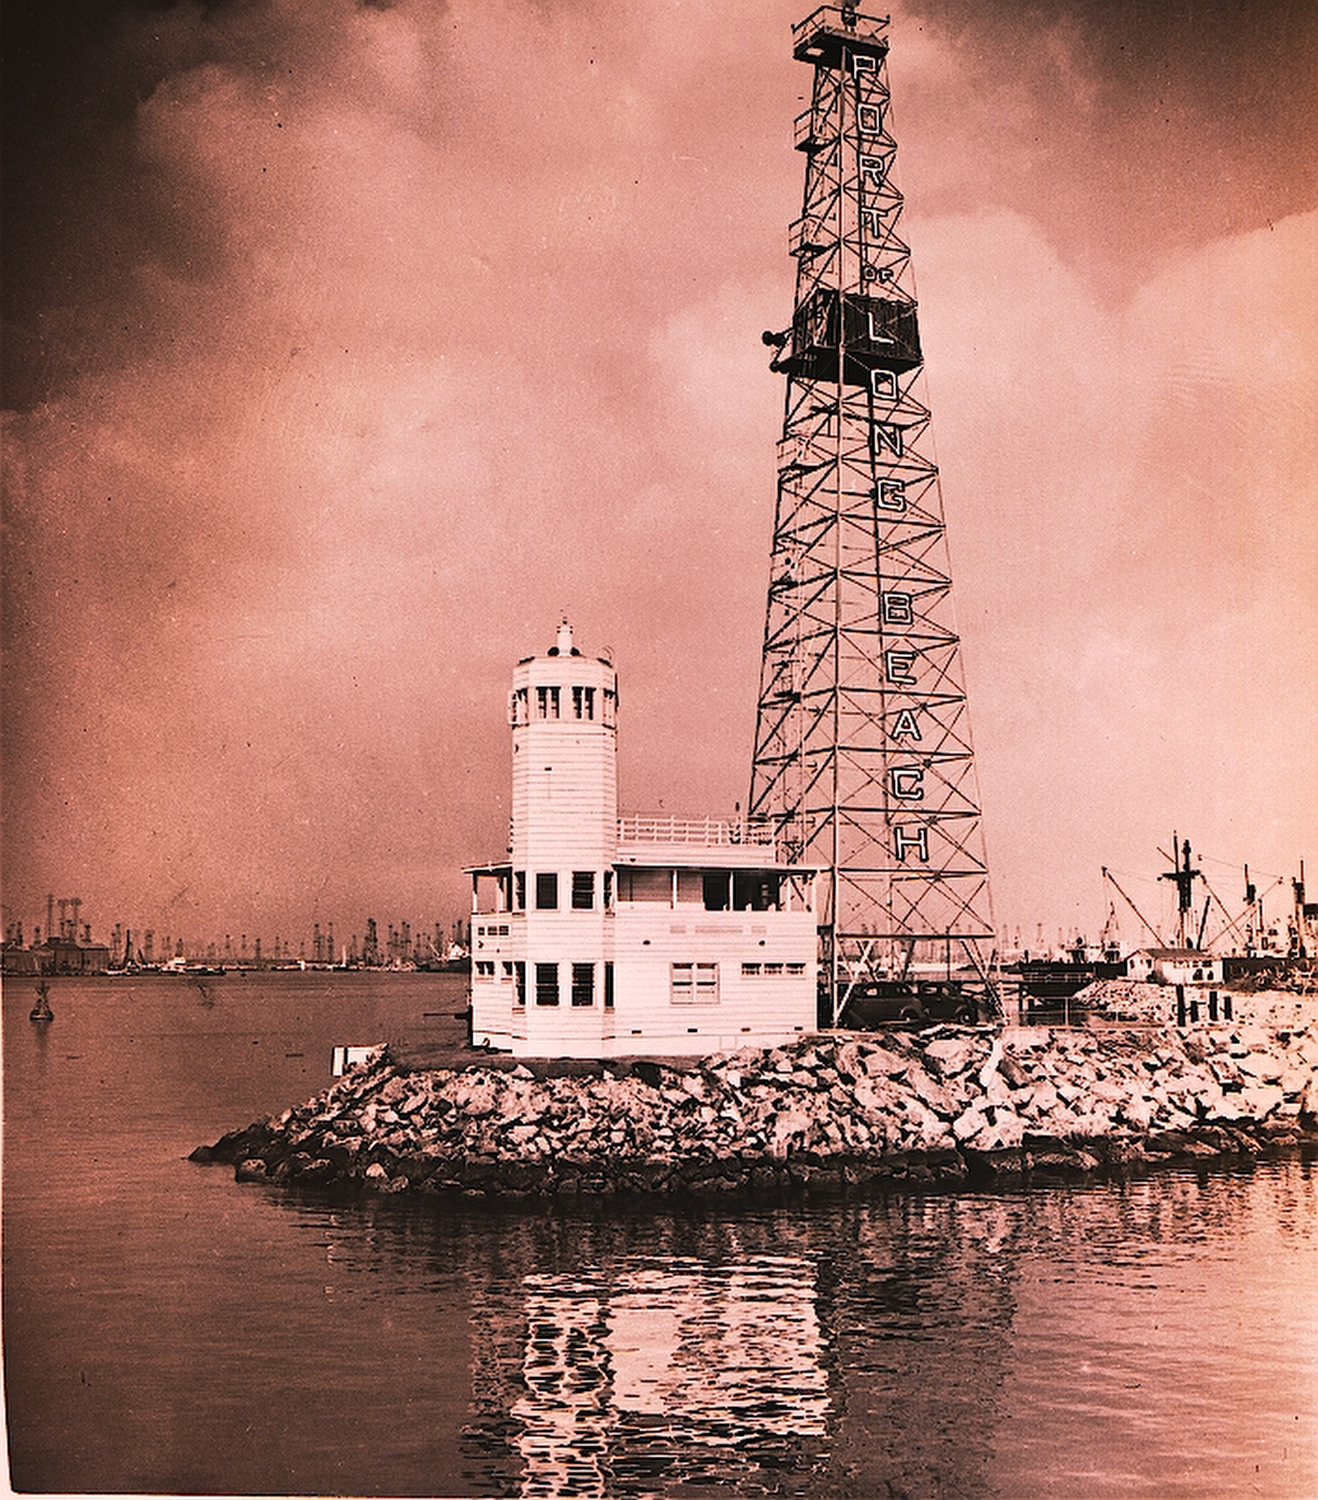 Jacobsen Pilot Service, port pilots in Long Beach since the 1920s, installed shore-based radar in 1949, the first pilots in the Western Hemisphere to do so.